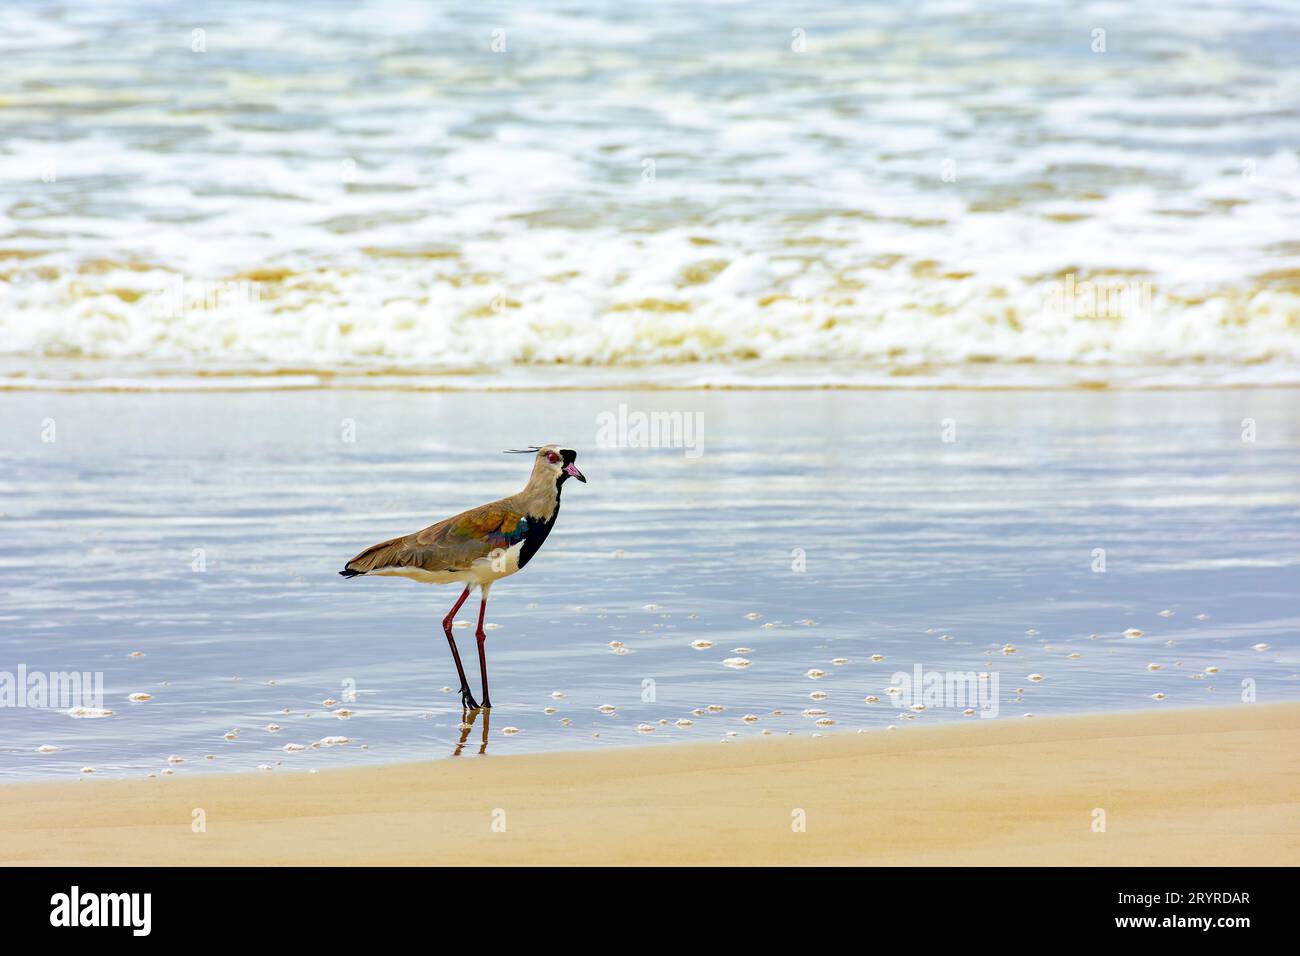 Southern Lapwing walking on the beach water Stock Photo